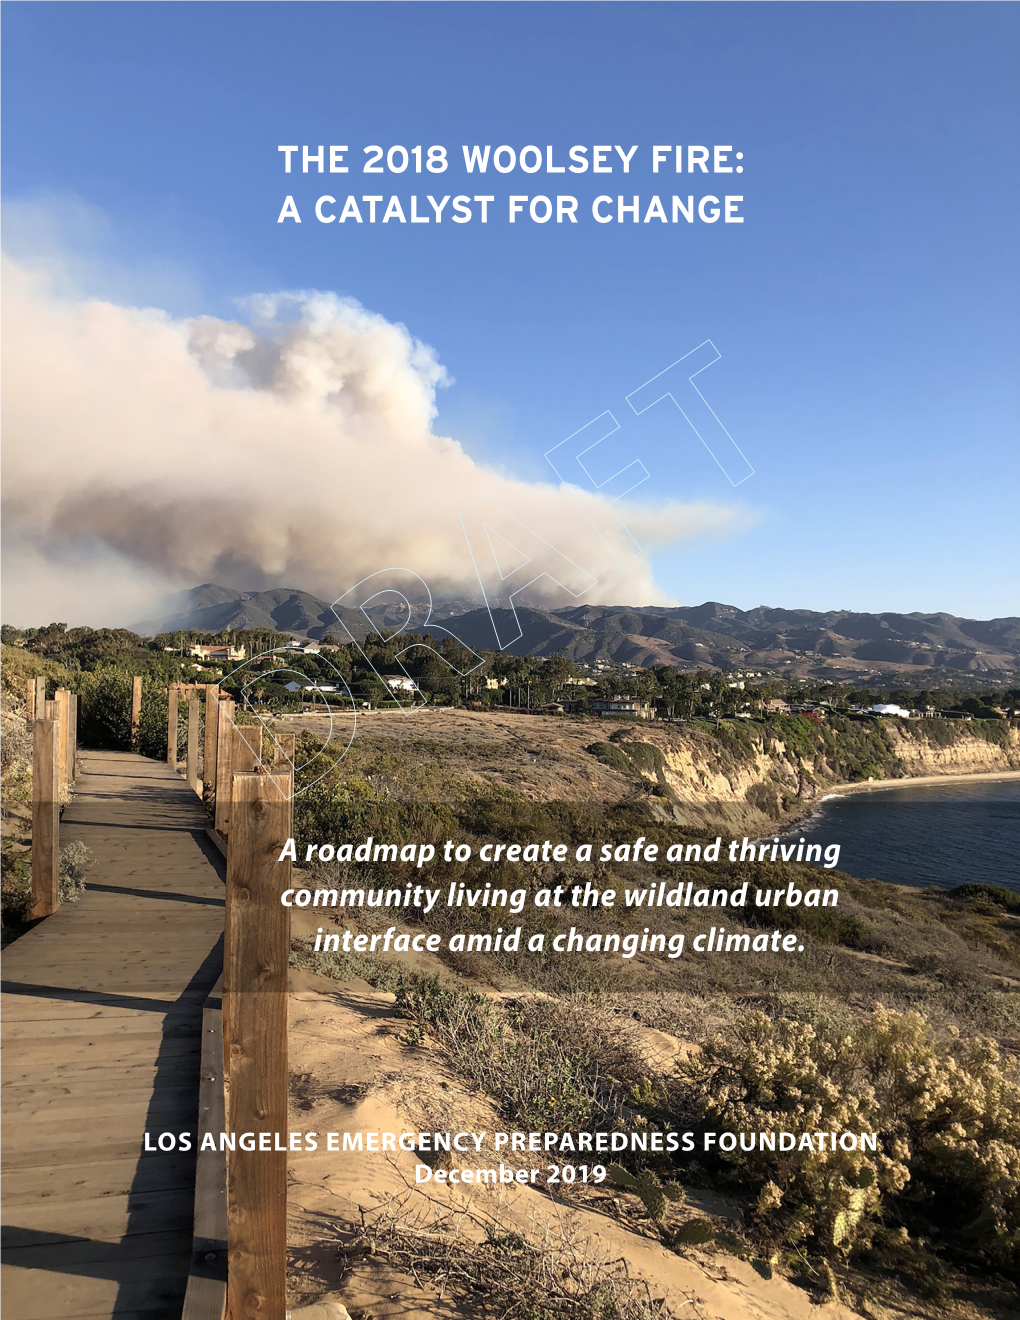 The 2018 Woolsey Fire: a Catalyst for Change